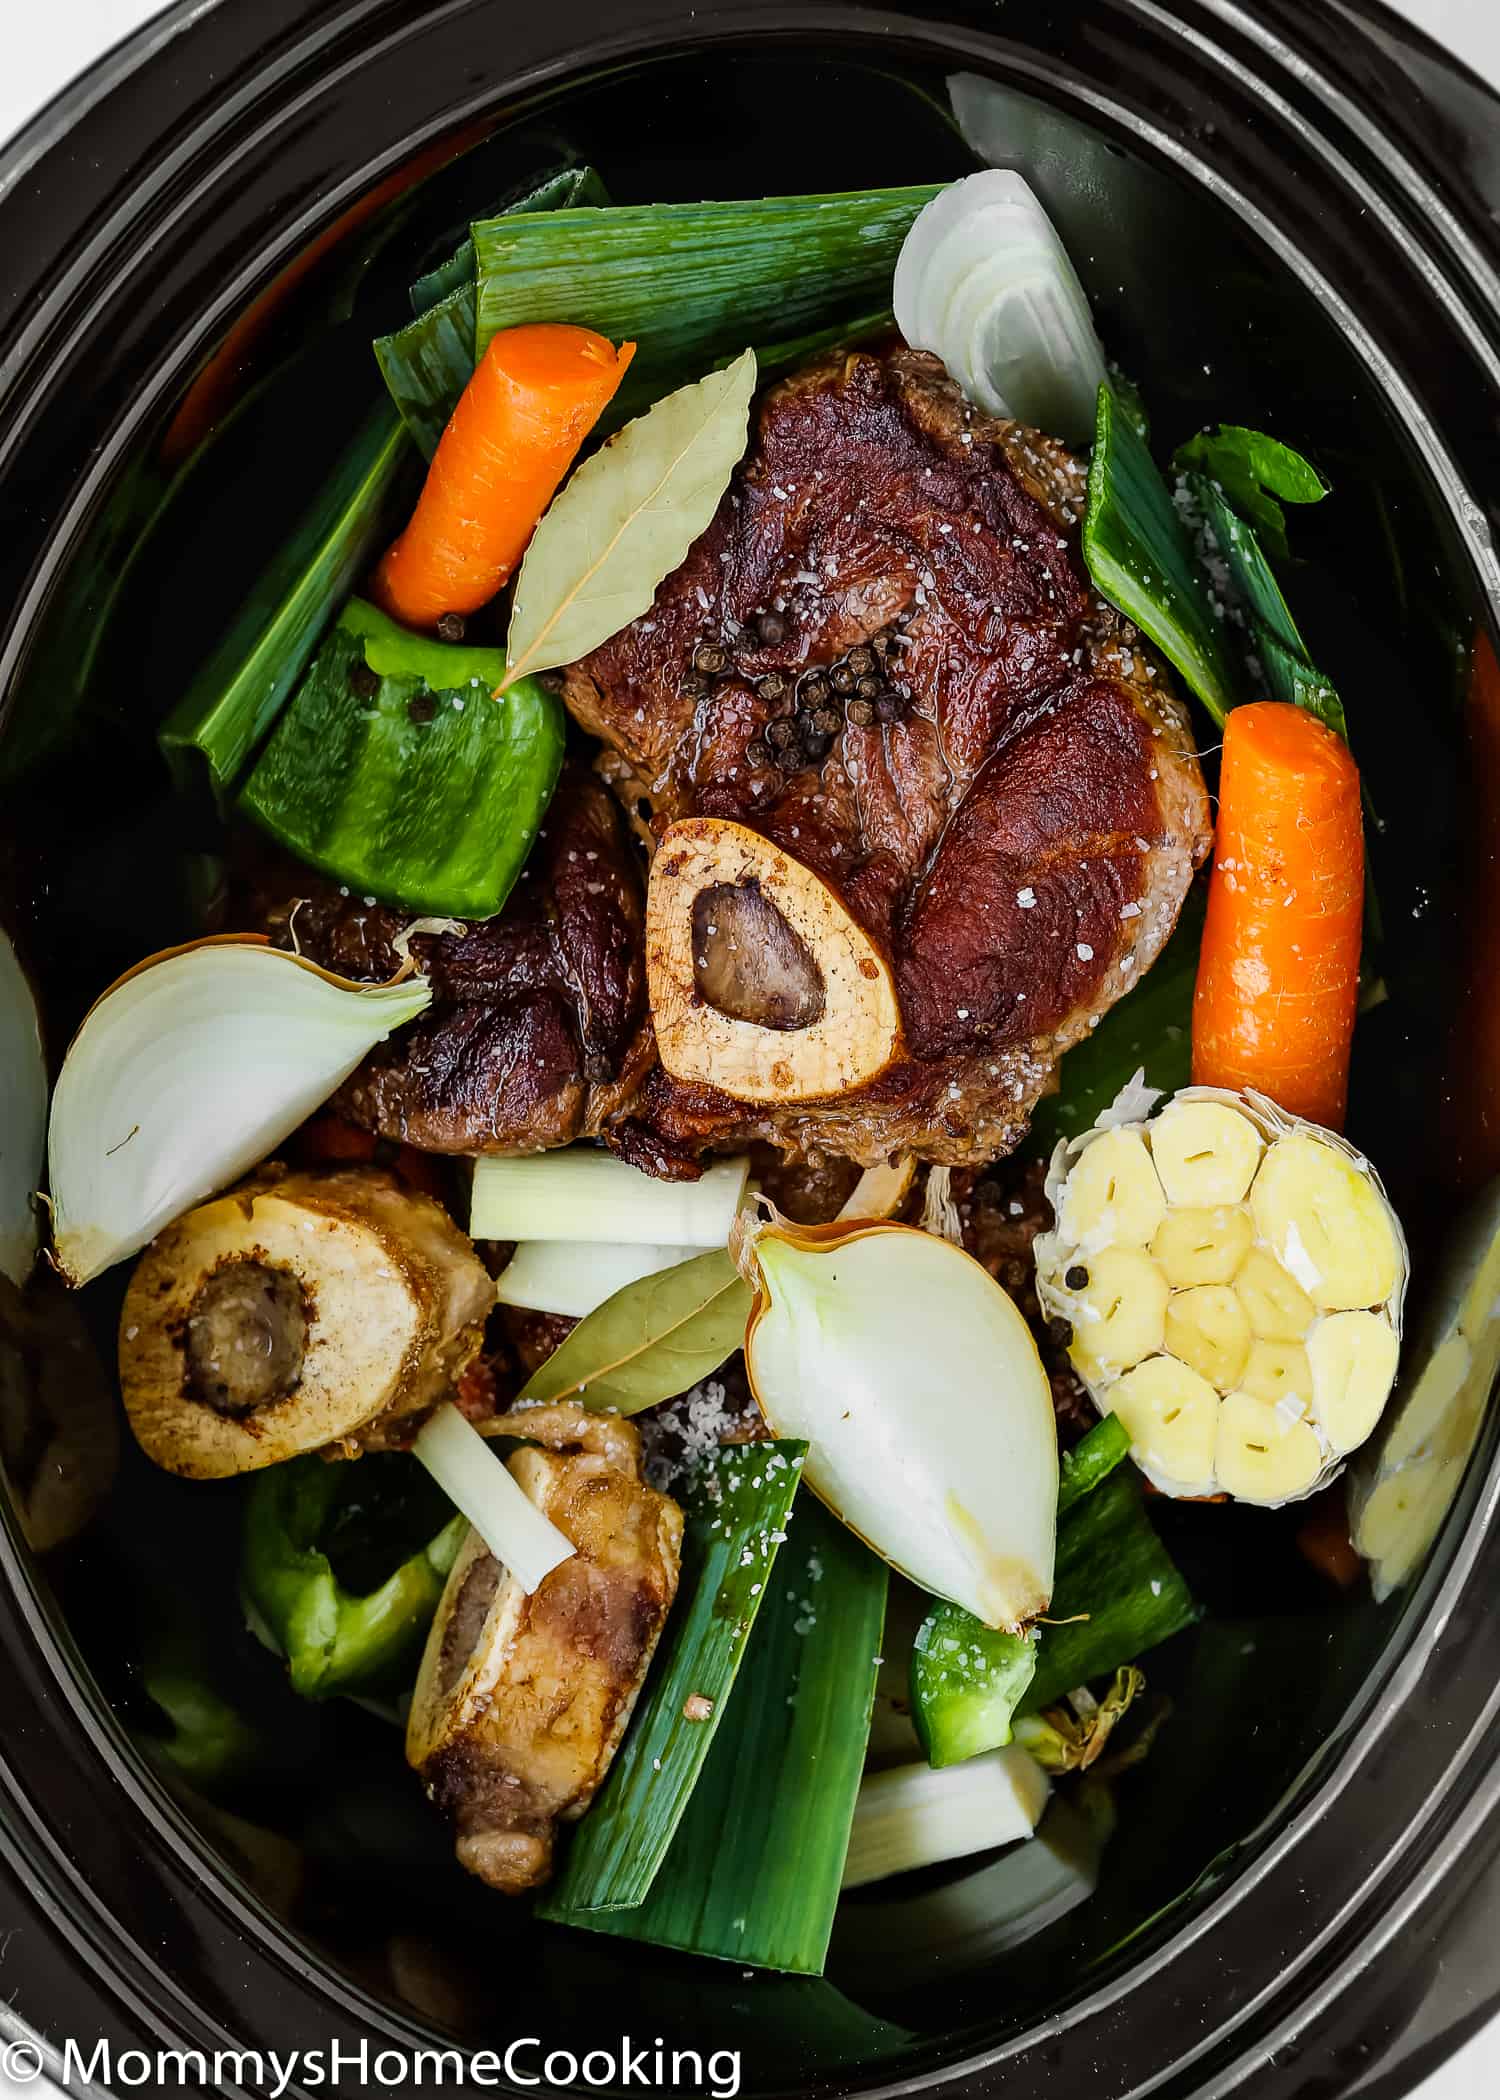 This Slow Cooker Beef Bone Broth is rich in nutrients and super tasty! It's easy to make and it's a money saver, too. Enjoy it on its own or use it to make your favorite stew, soup, and many other dishes. https://mommyshomecooking.com